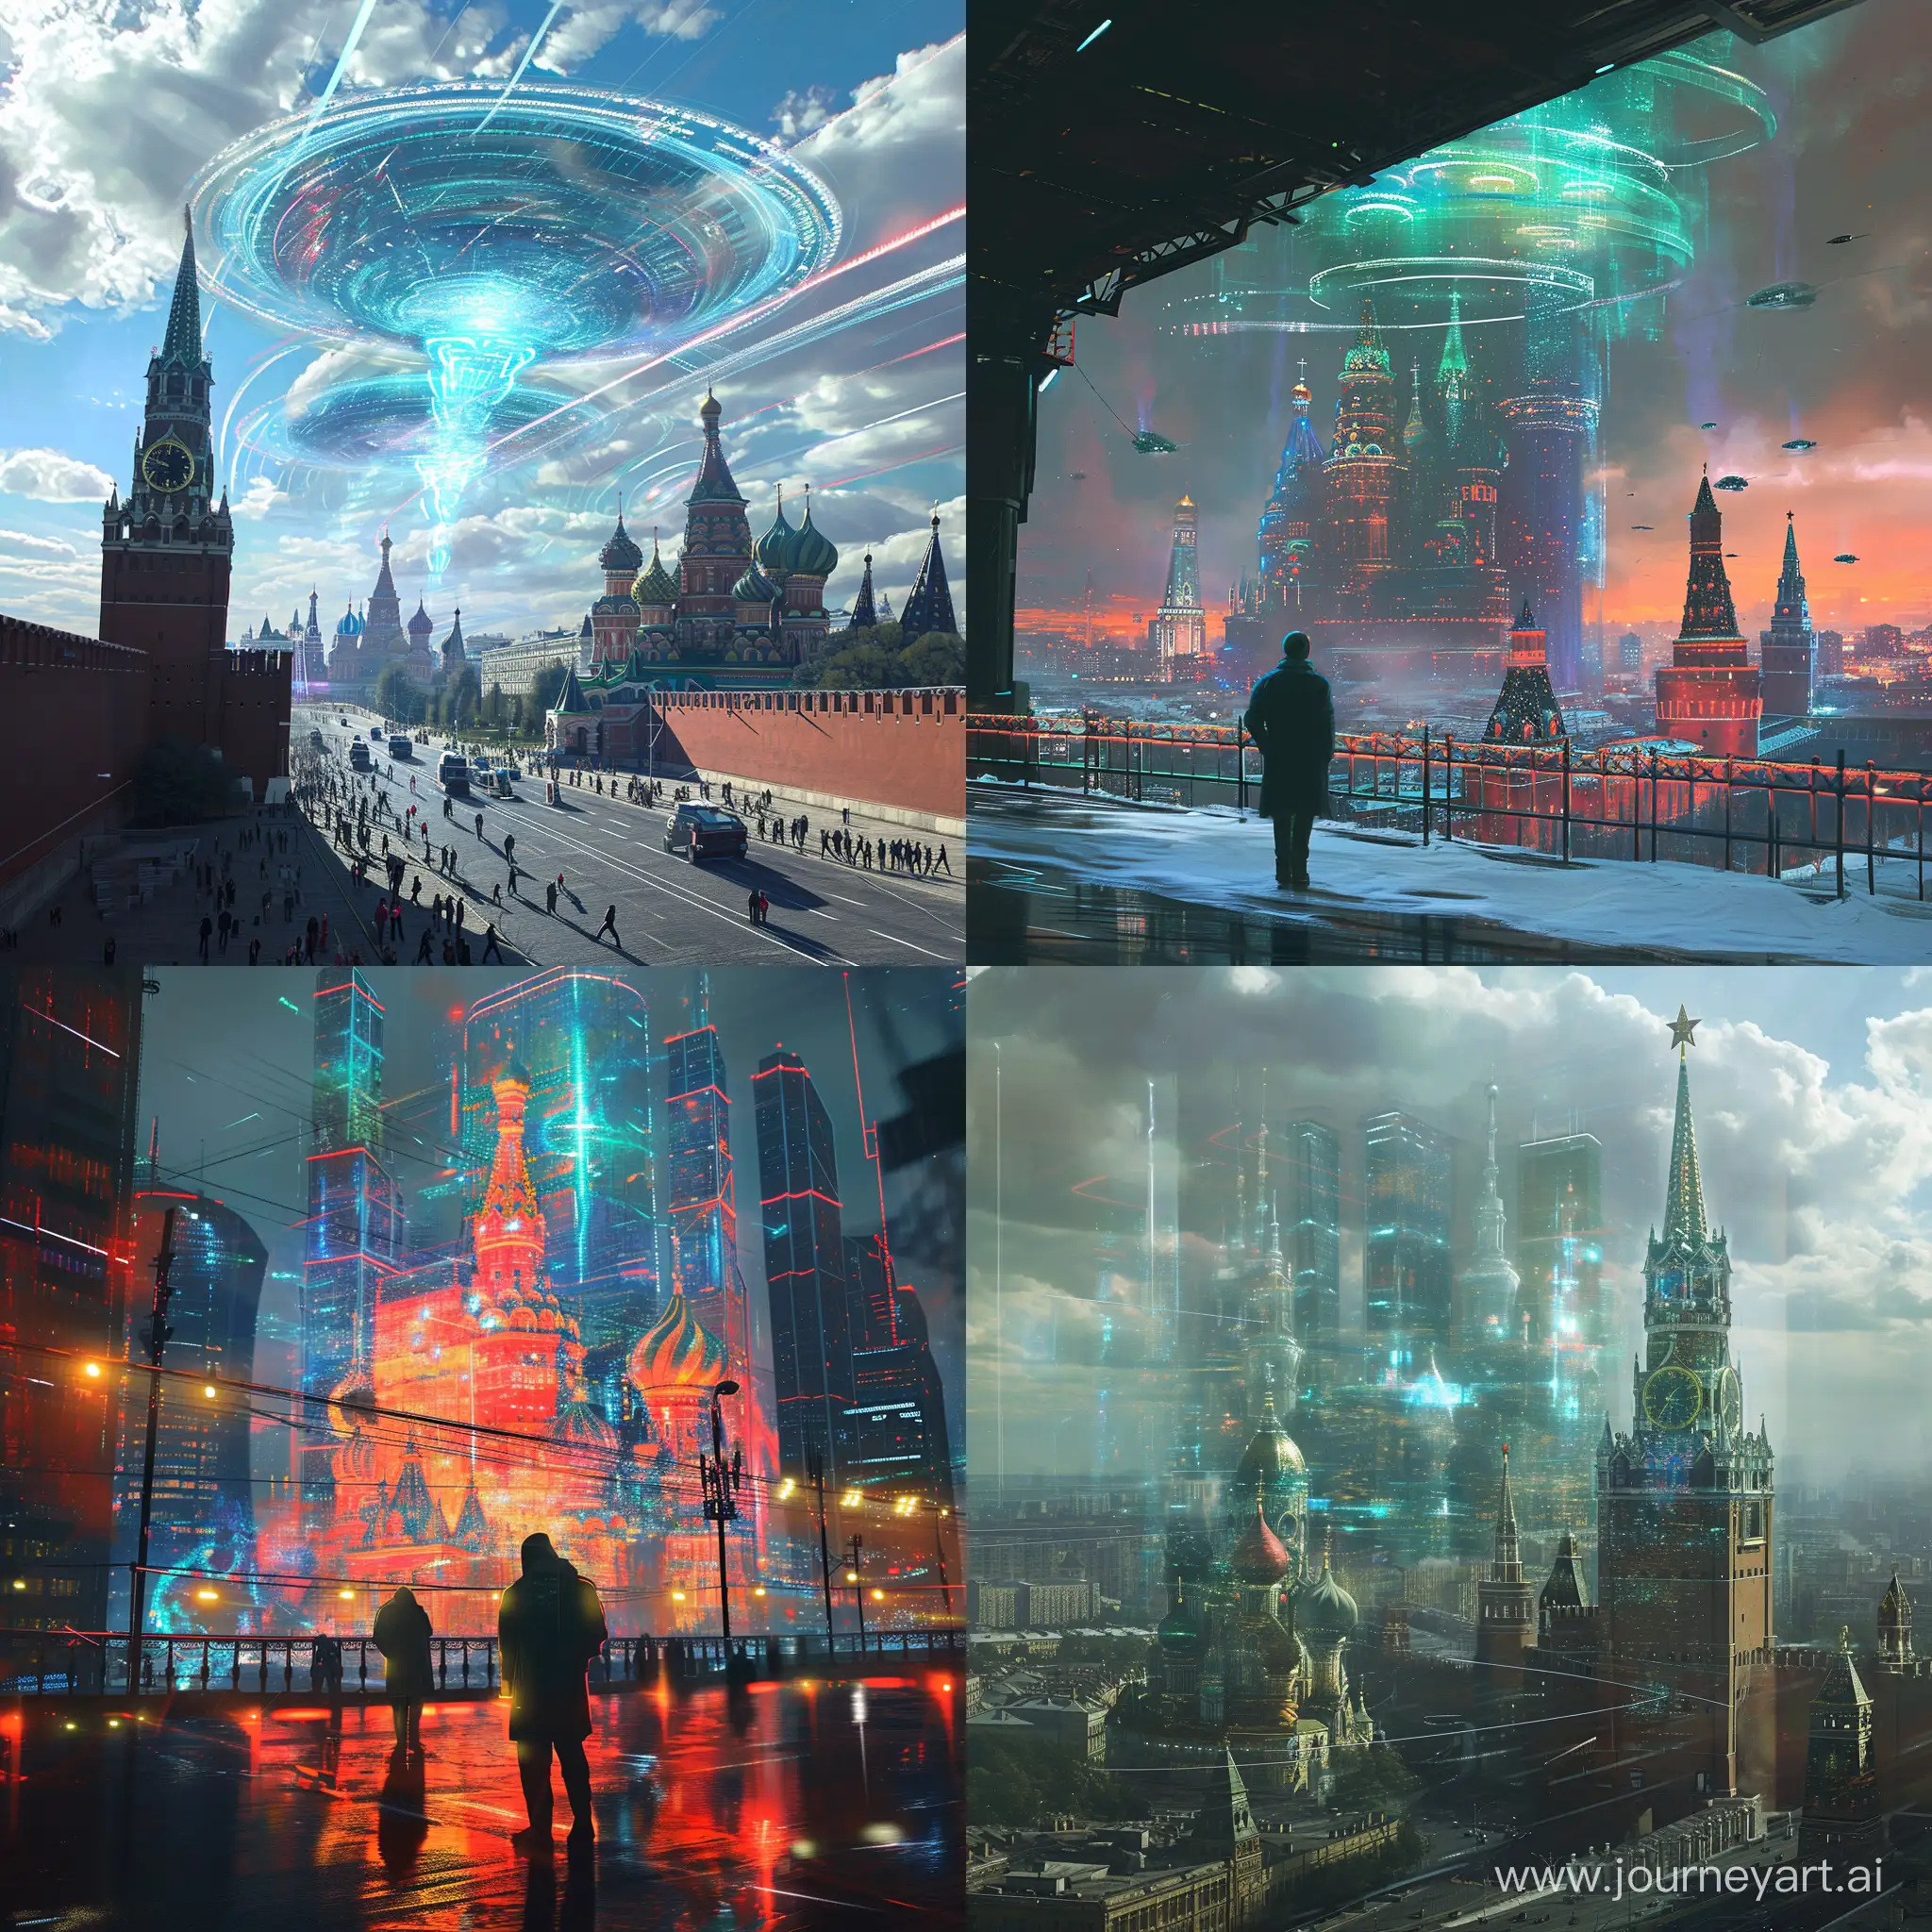 Futuristic-Moscow-Holographic-Projections-SciFi-Urban-Art